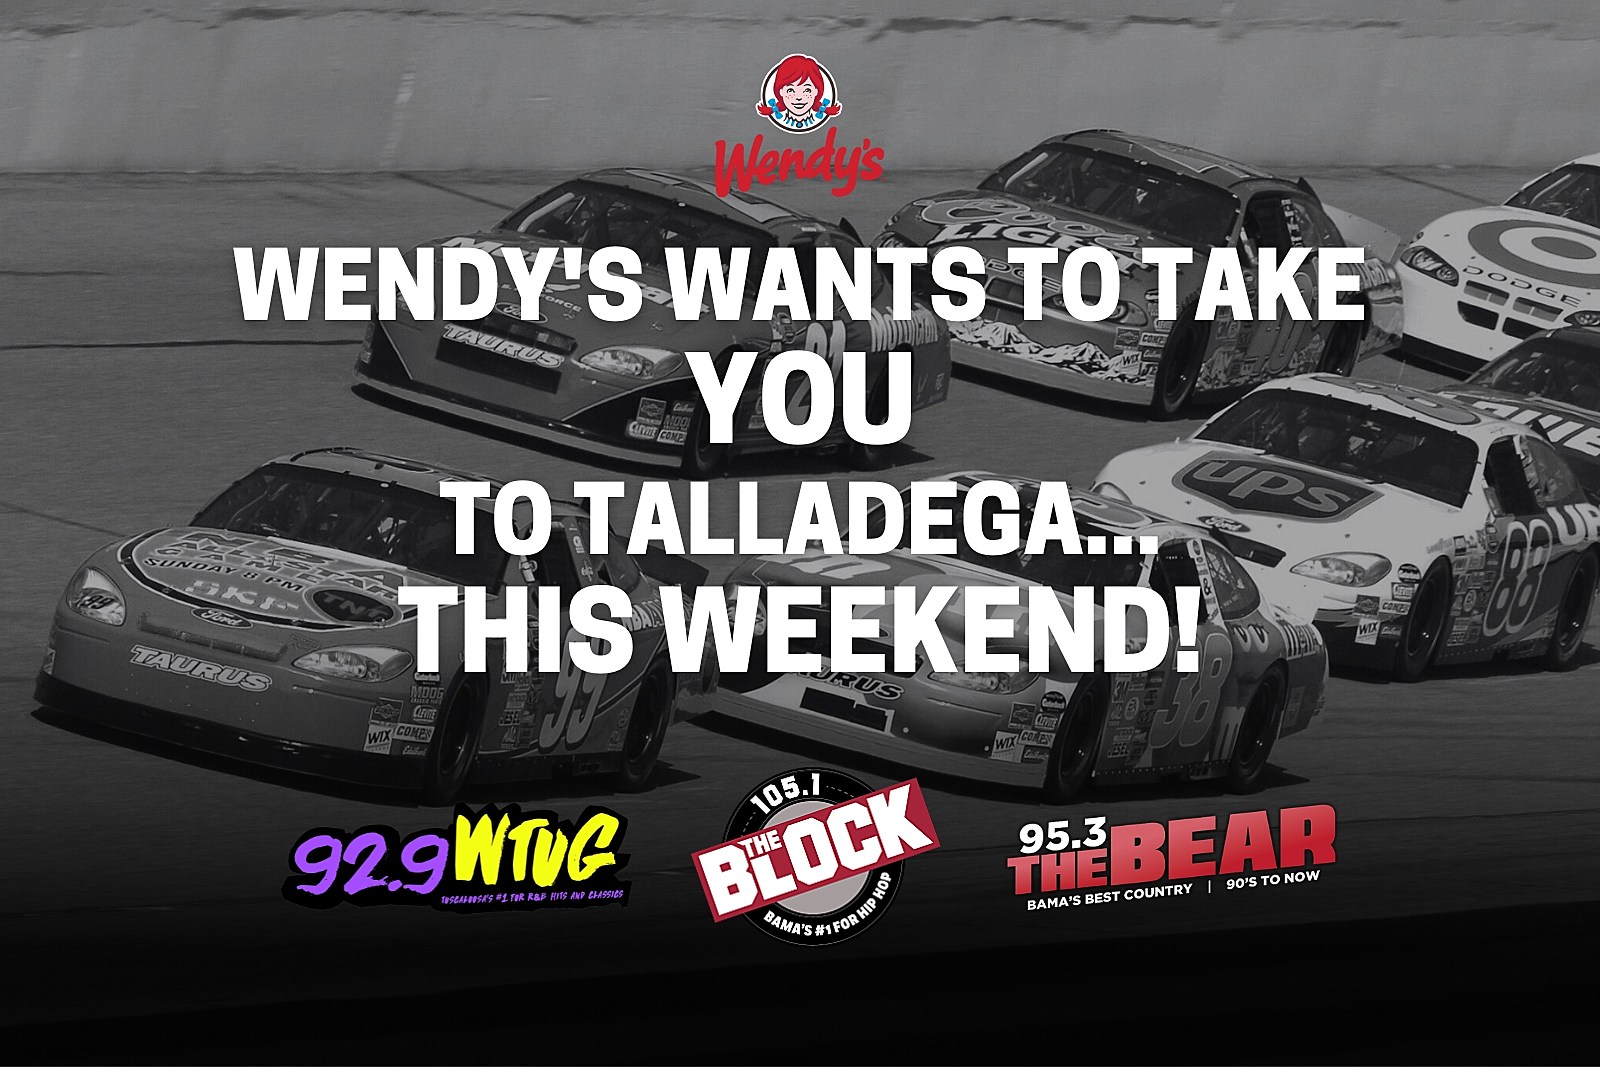 Win Tickets to the Talladega Superspeedway GEICO 500 NASCAR Race